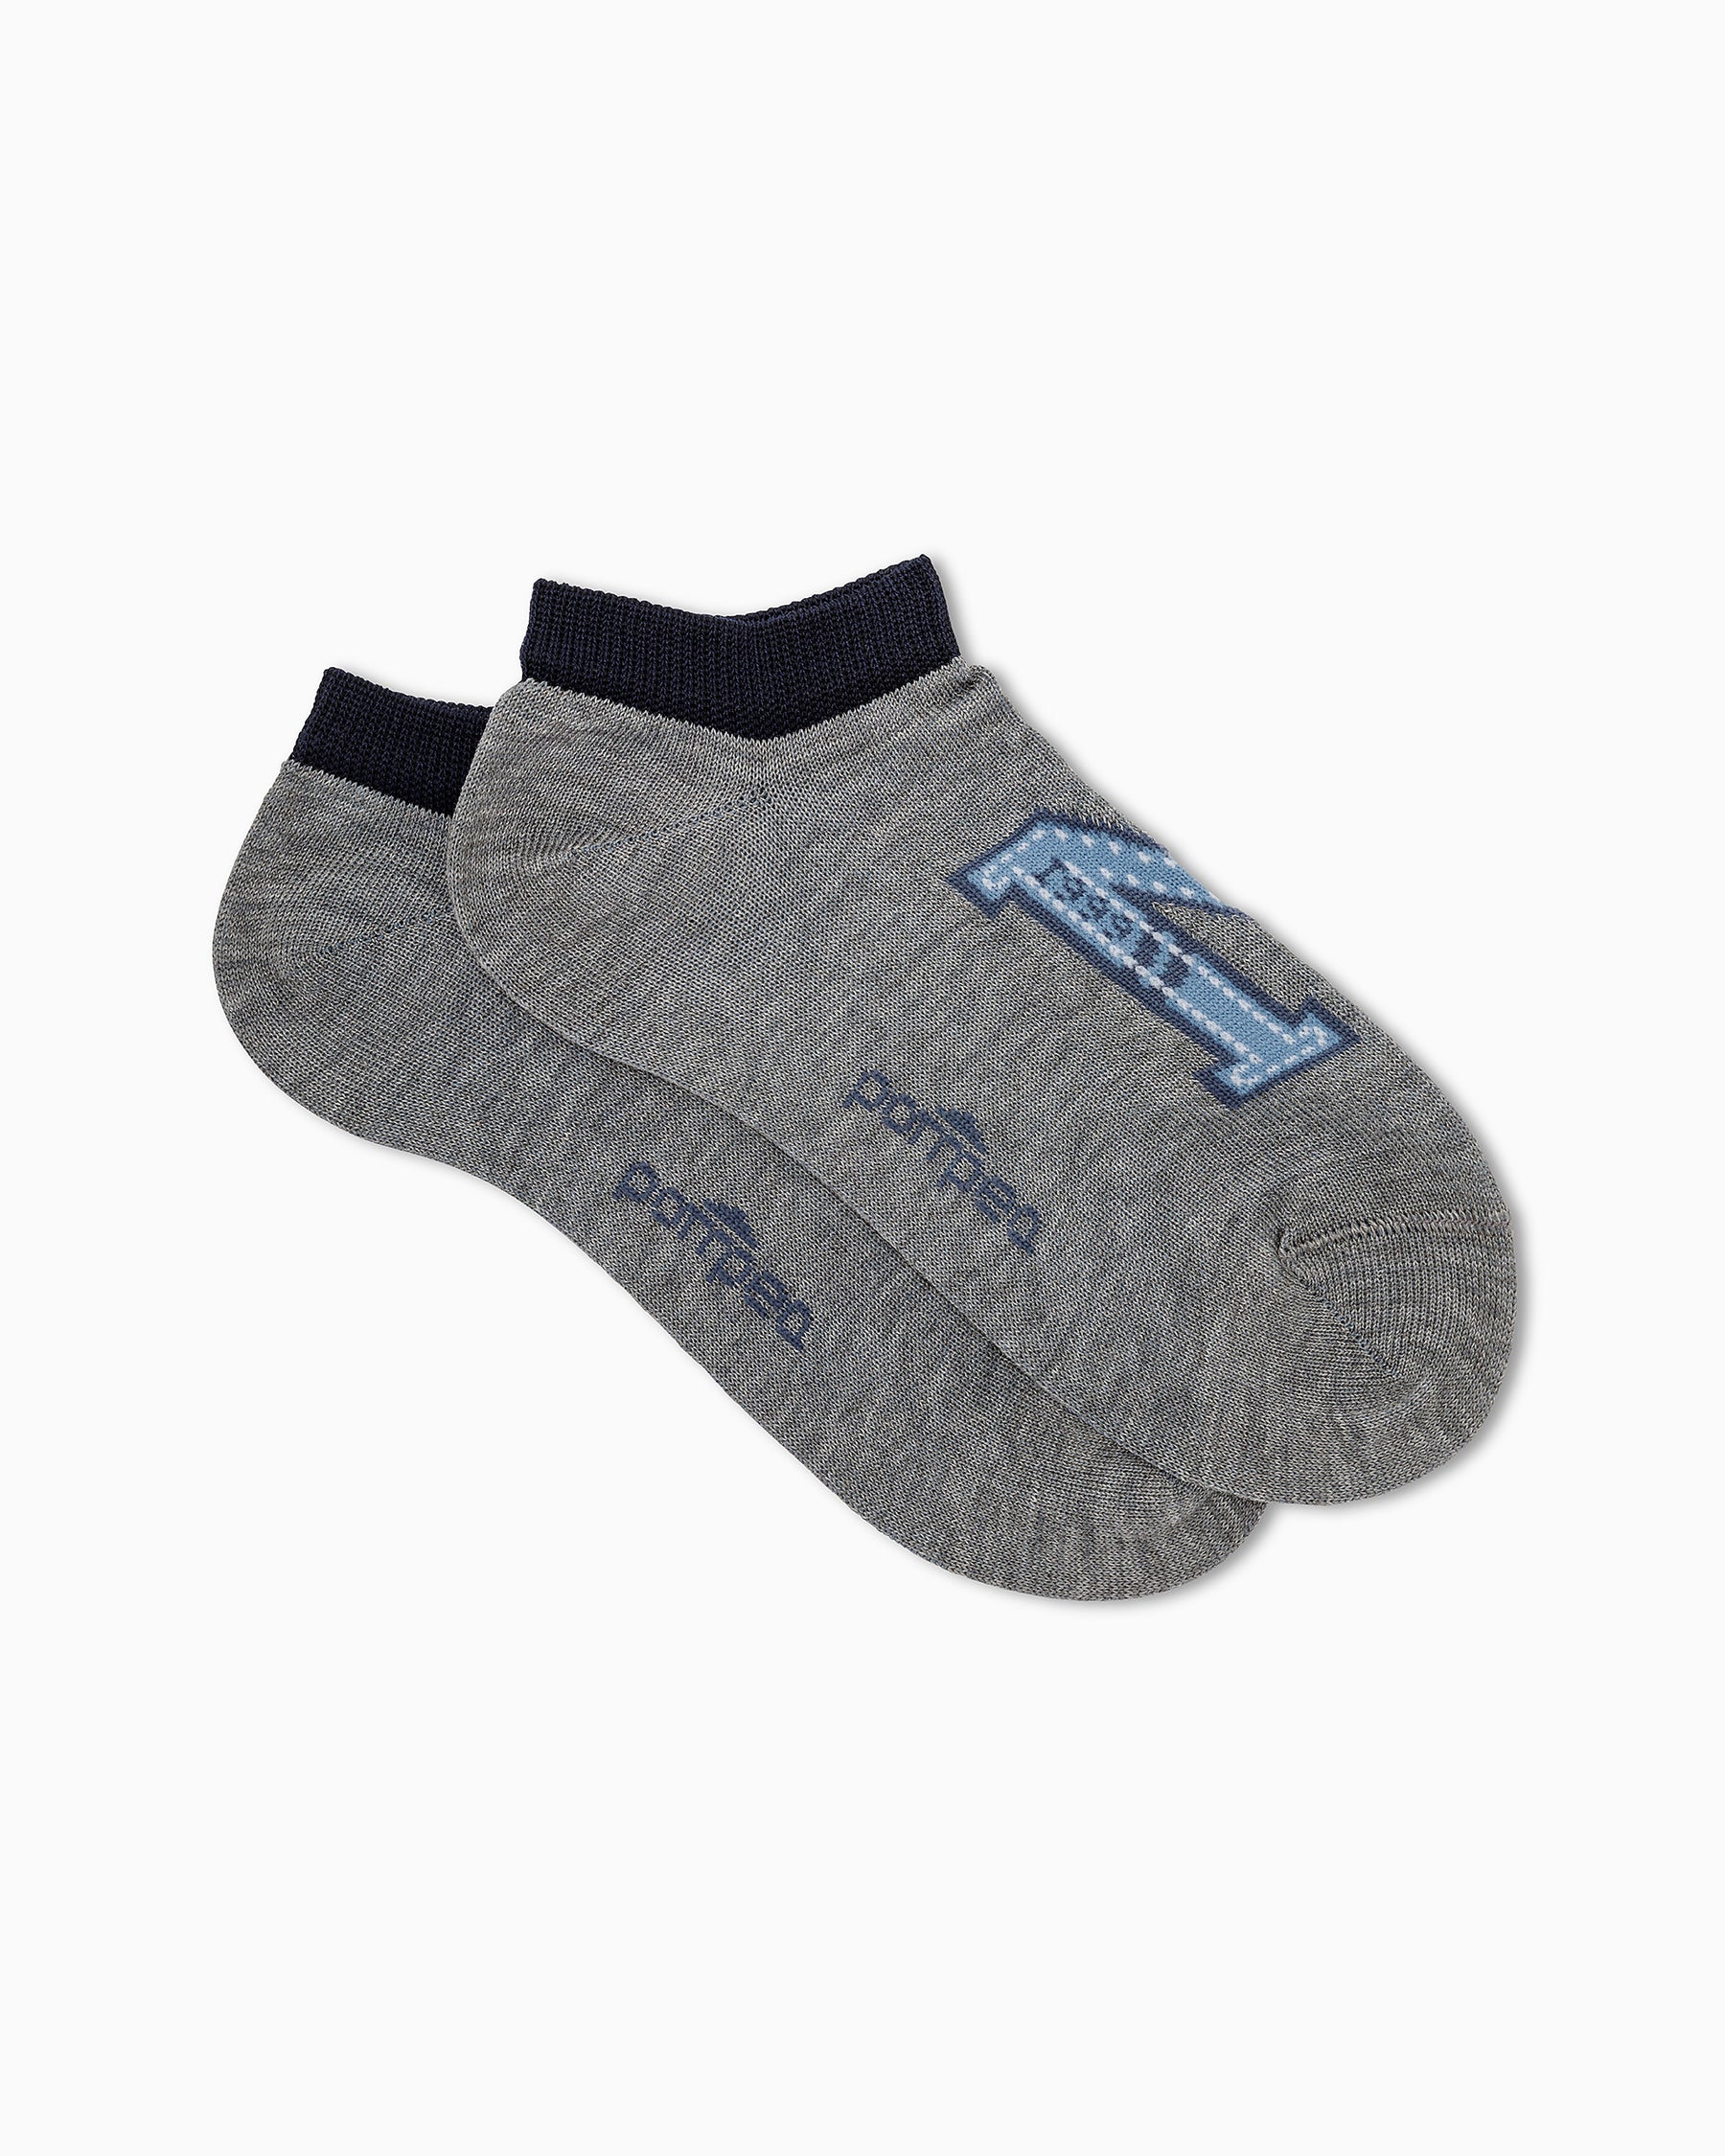 BOYS' CARDELLINO TRAINER LINERS 